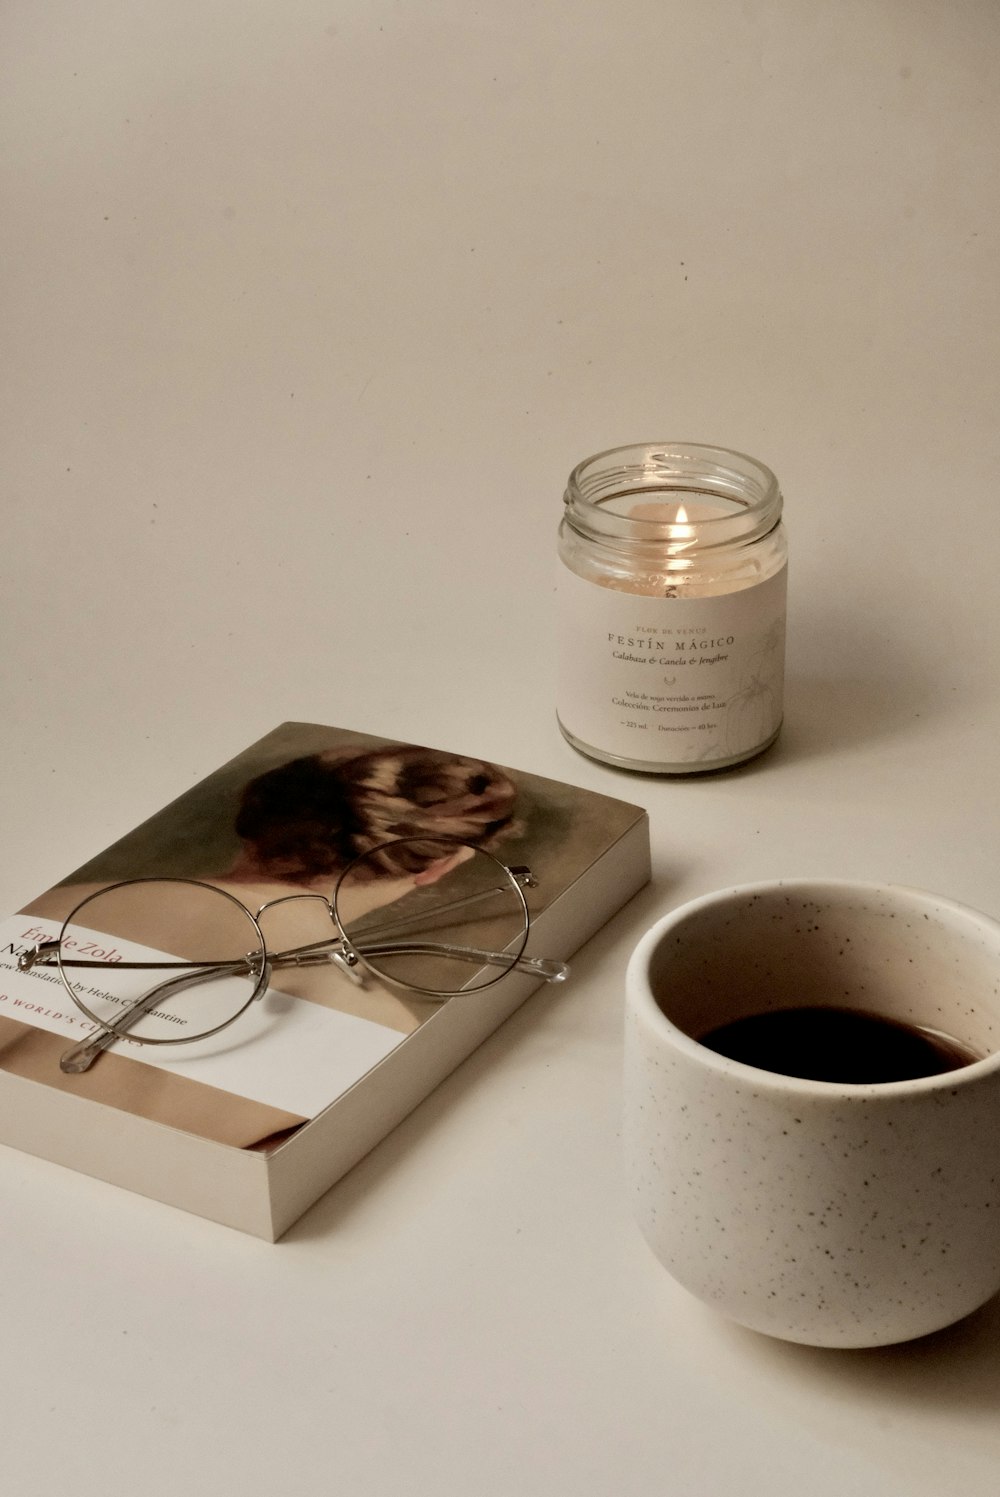 a cup of coffee next to a book and candle